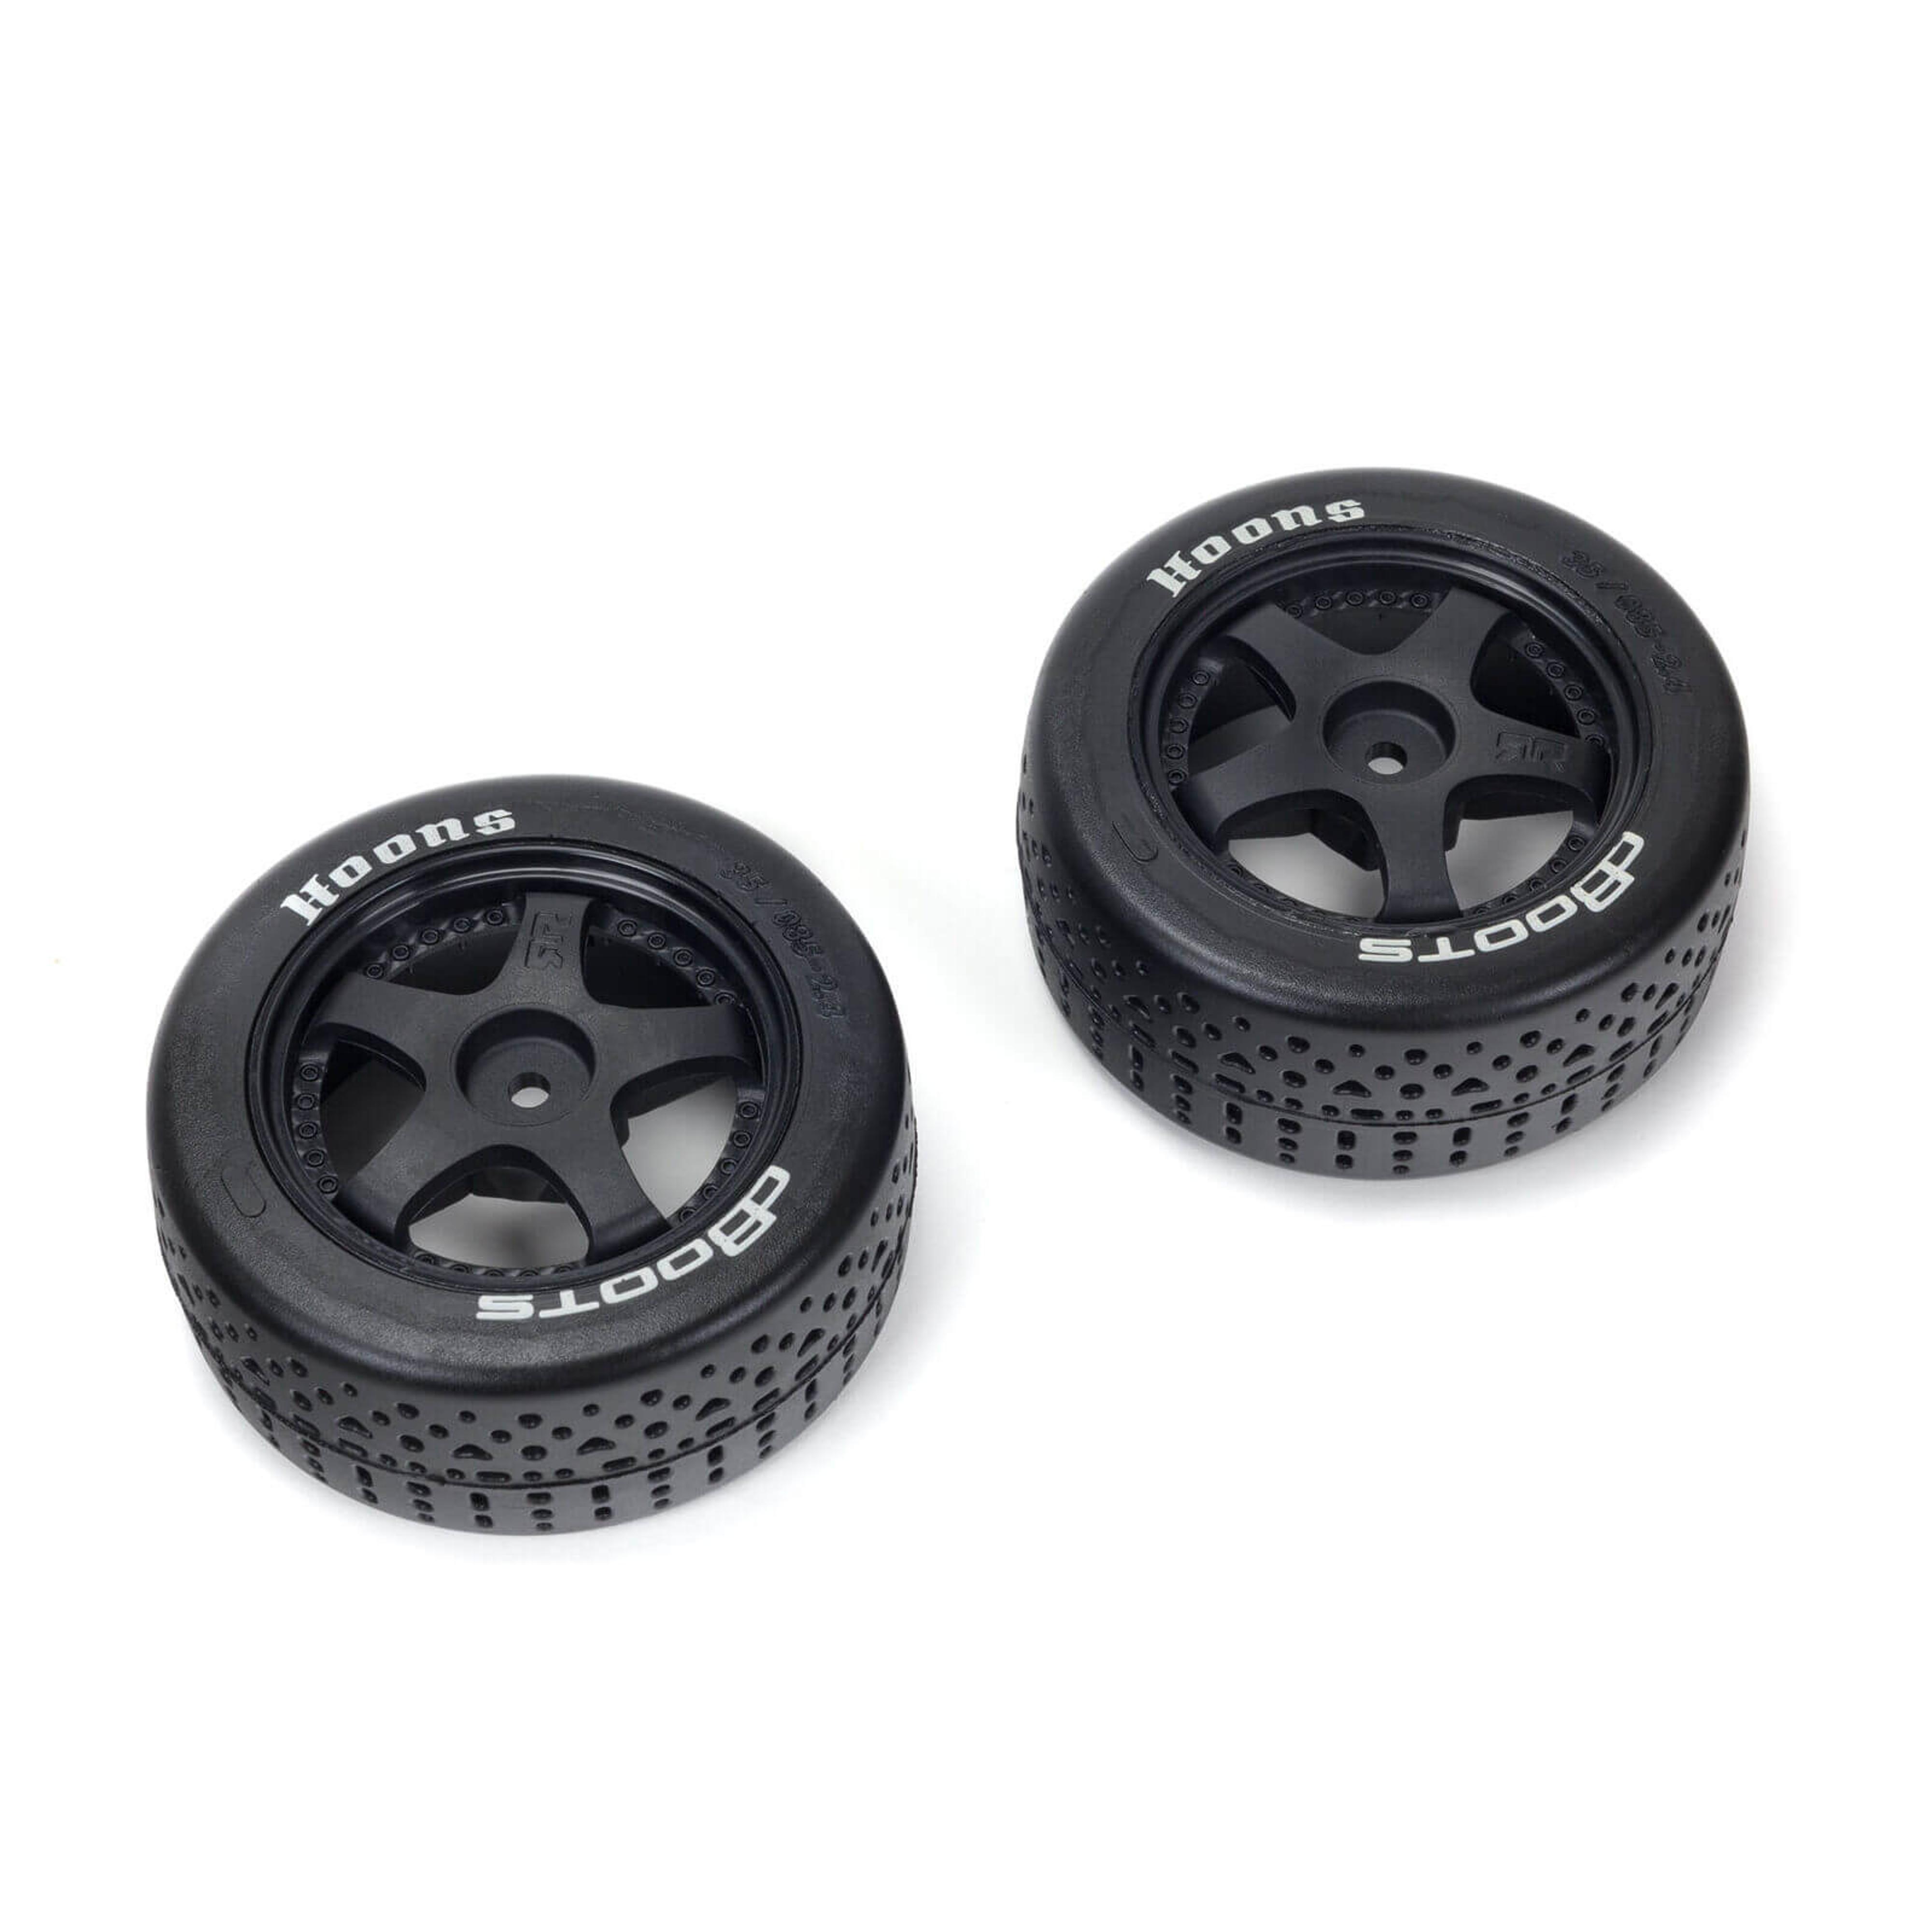 dBoots Hoons 35/085 2.4 Belted 5-Spoke Wheels (White Compound)